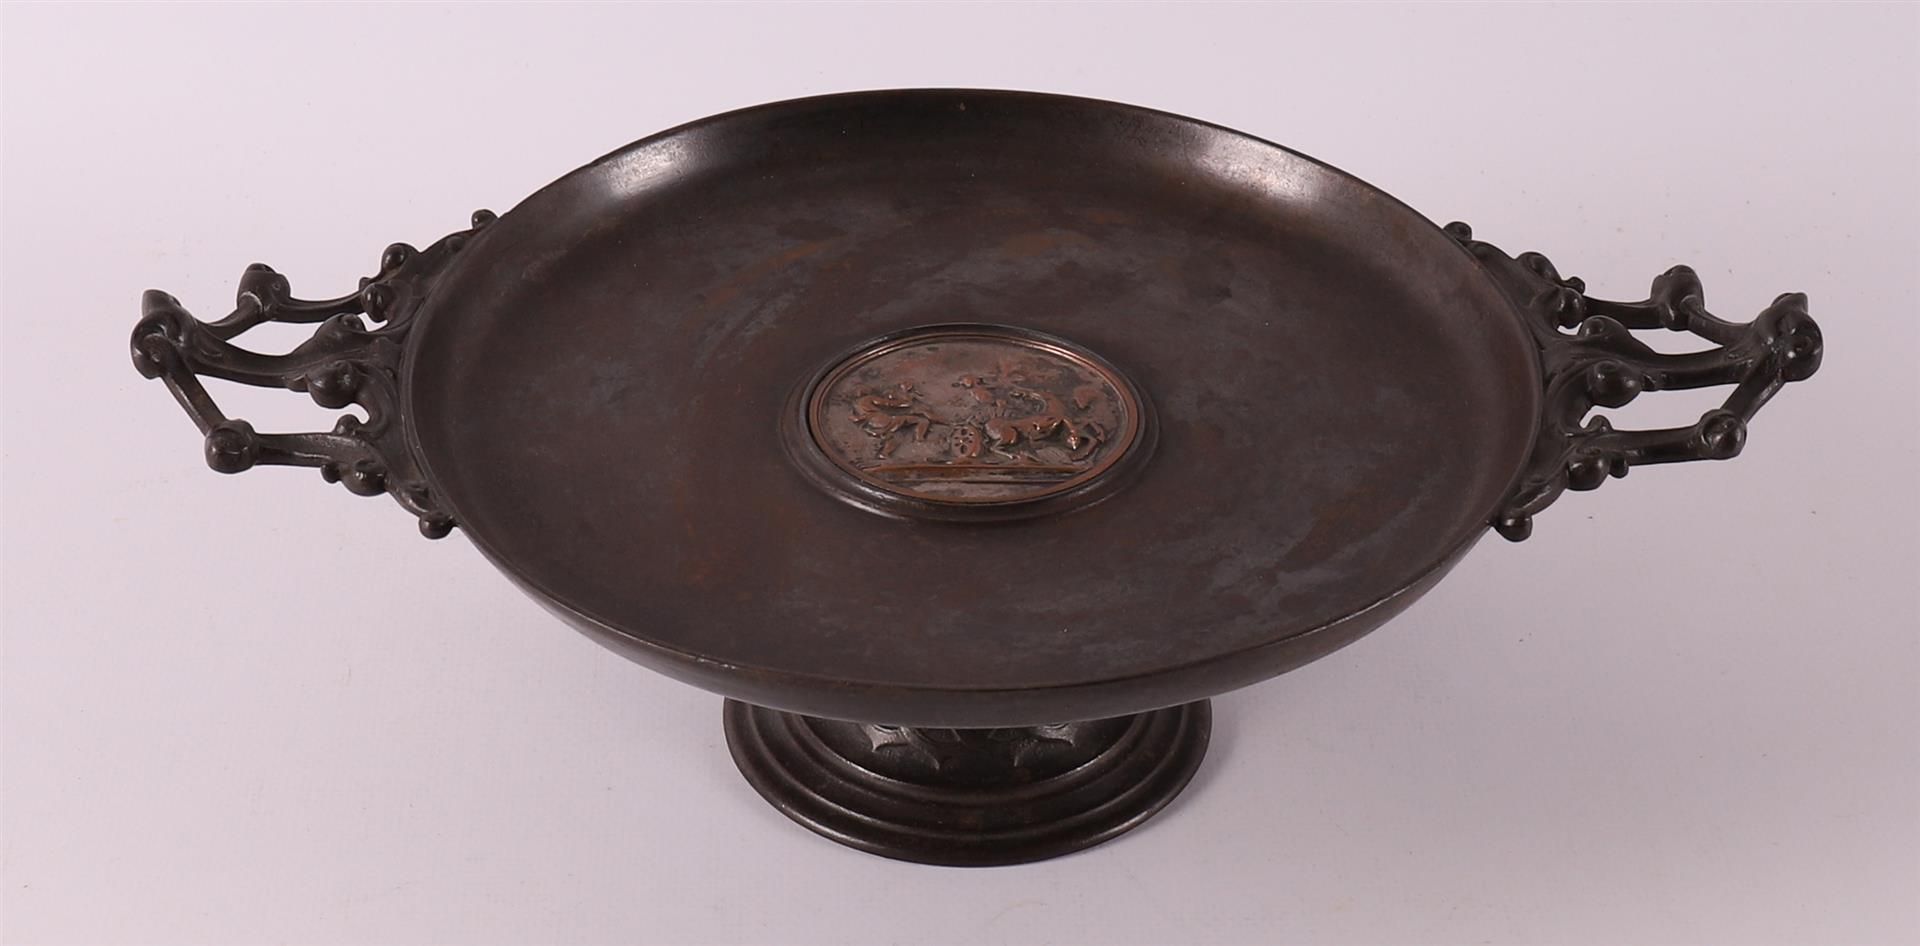 A cast iron and copper mounted tazza from 'EG Zimmermann in Hanau',